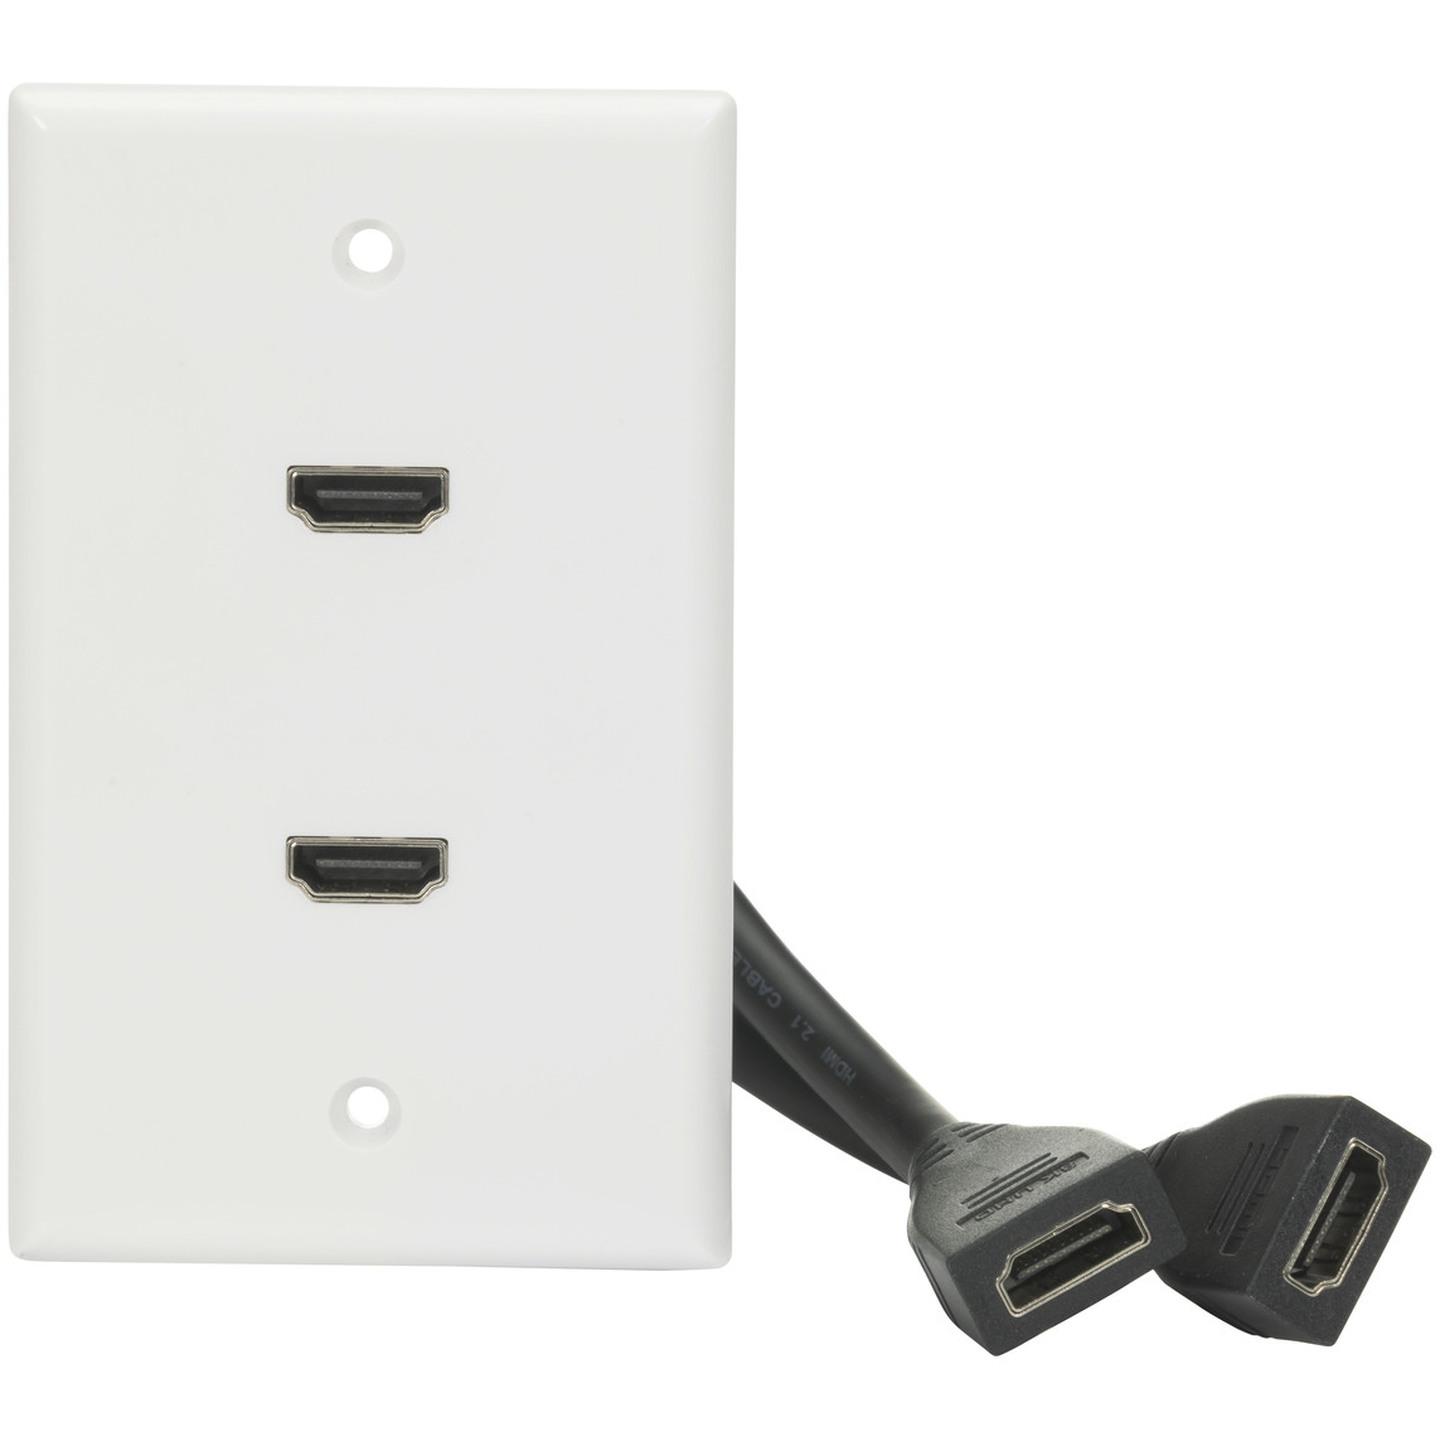 Dual HDMI 2.1 Wall Plate with Flylead